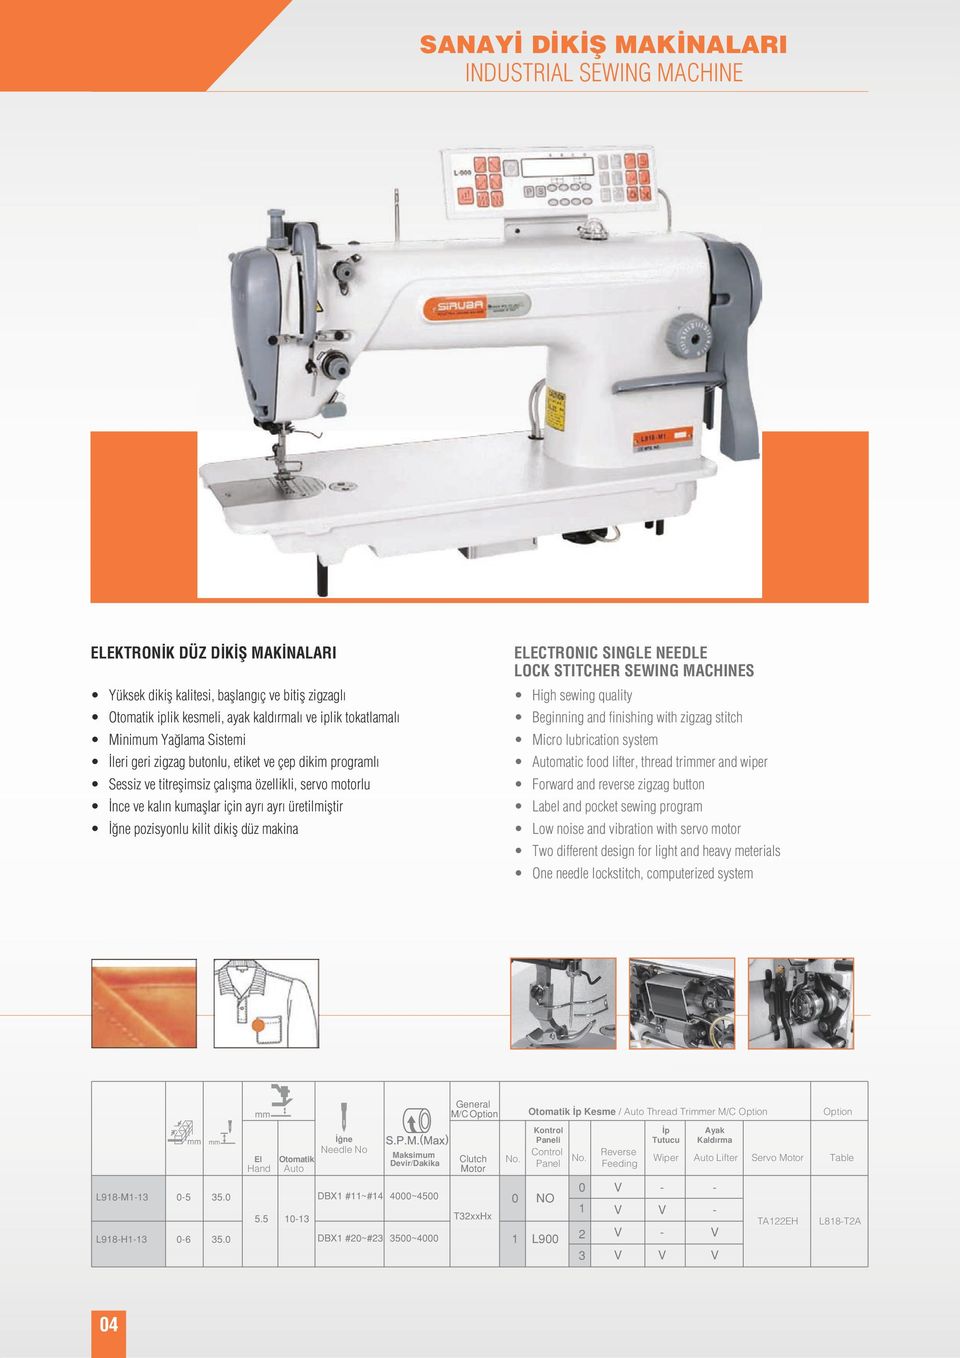 NEEDLE LOCK STITCHER SEWING MACHINES High sewing quality Beginning and finishing with zigzag stitch Micro lubrication system Automatic food lifter, thread trimmer and wiper Forward and reverse zigzag